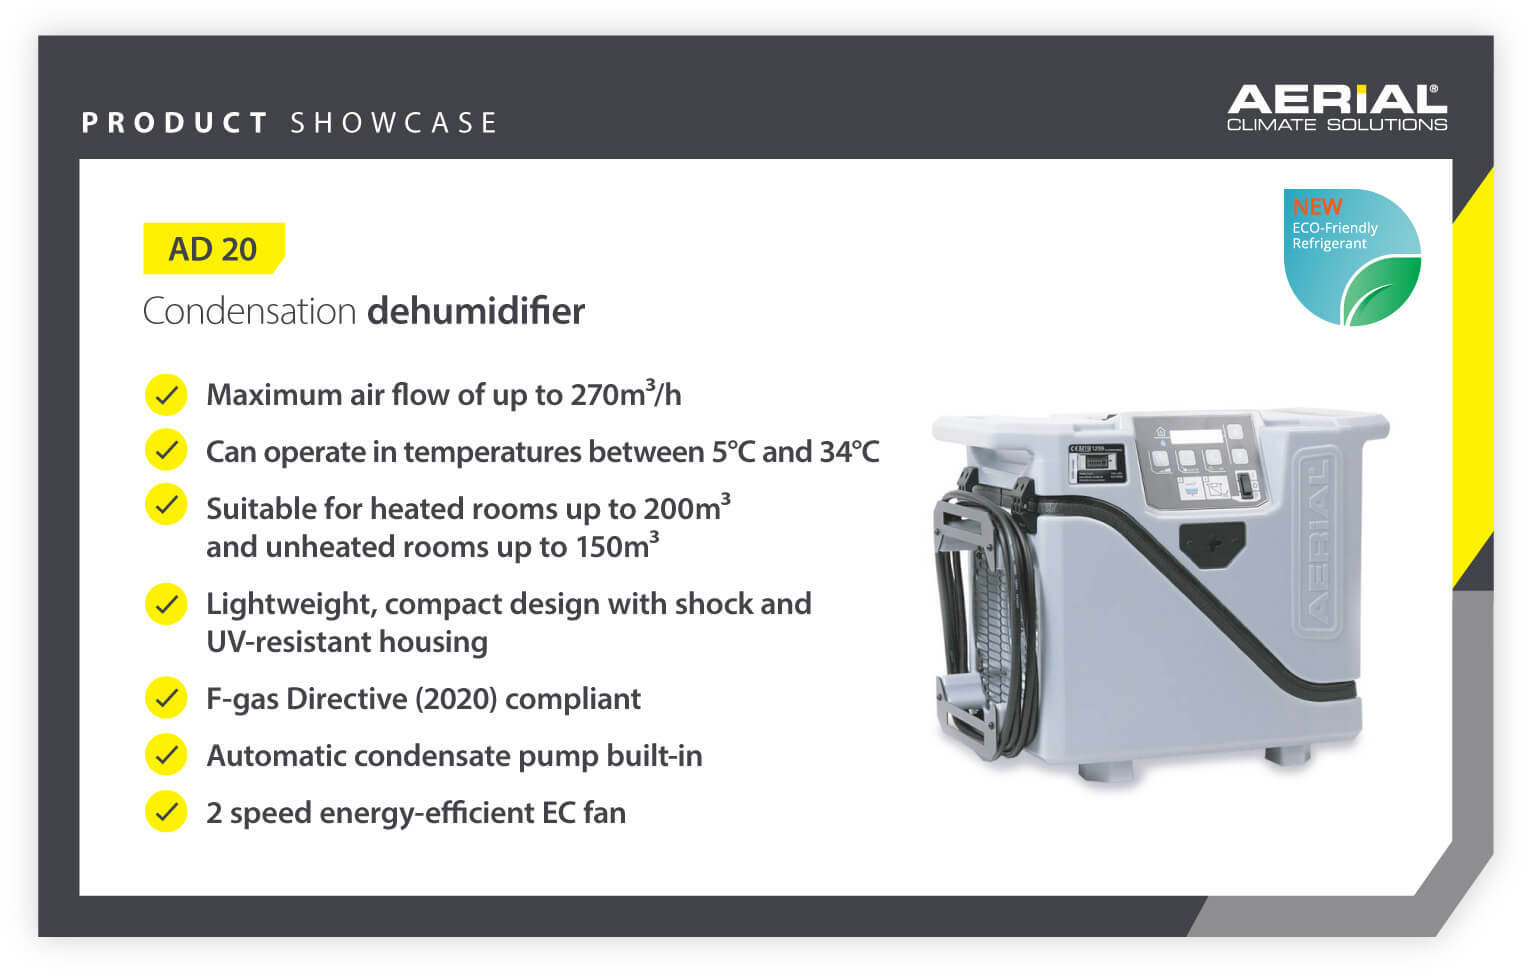 Product showcase for portable condensation dehumidifier AD20 with feature list - Infographic image